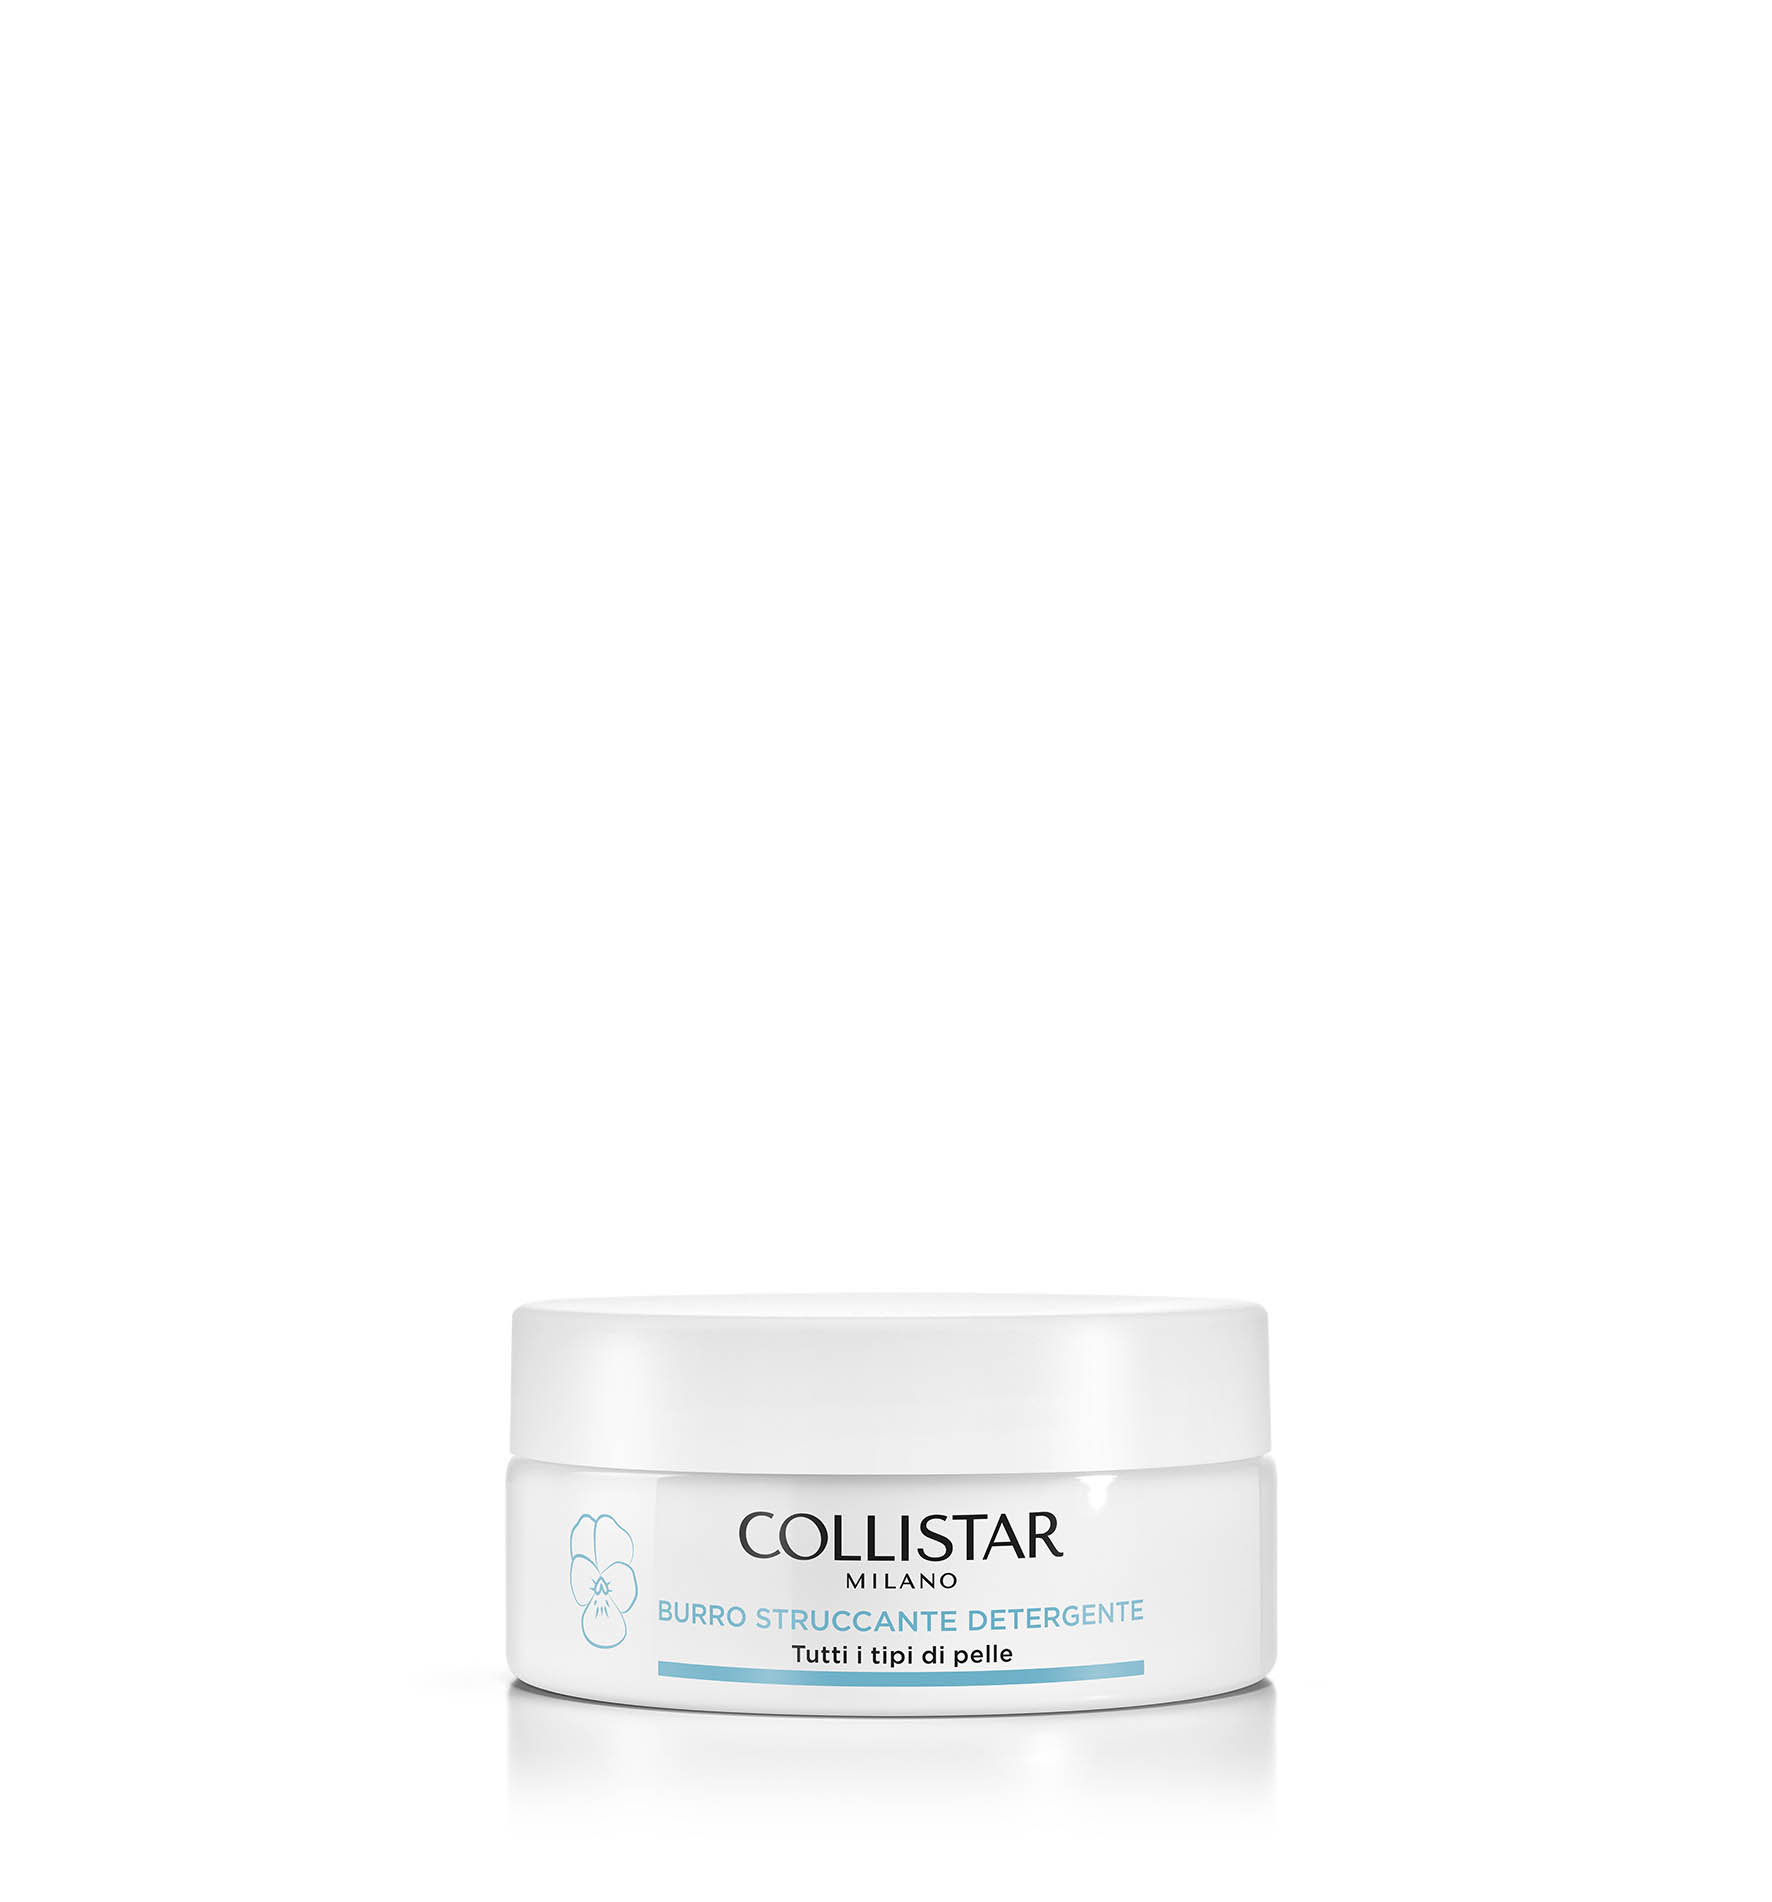 MAKE-UP REMOVING CLEANSING BALM - NEW | Collistar - Shop Online Ufficiale